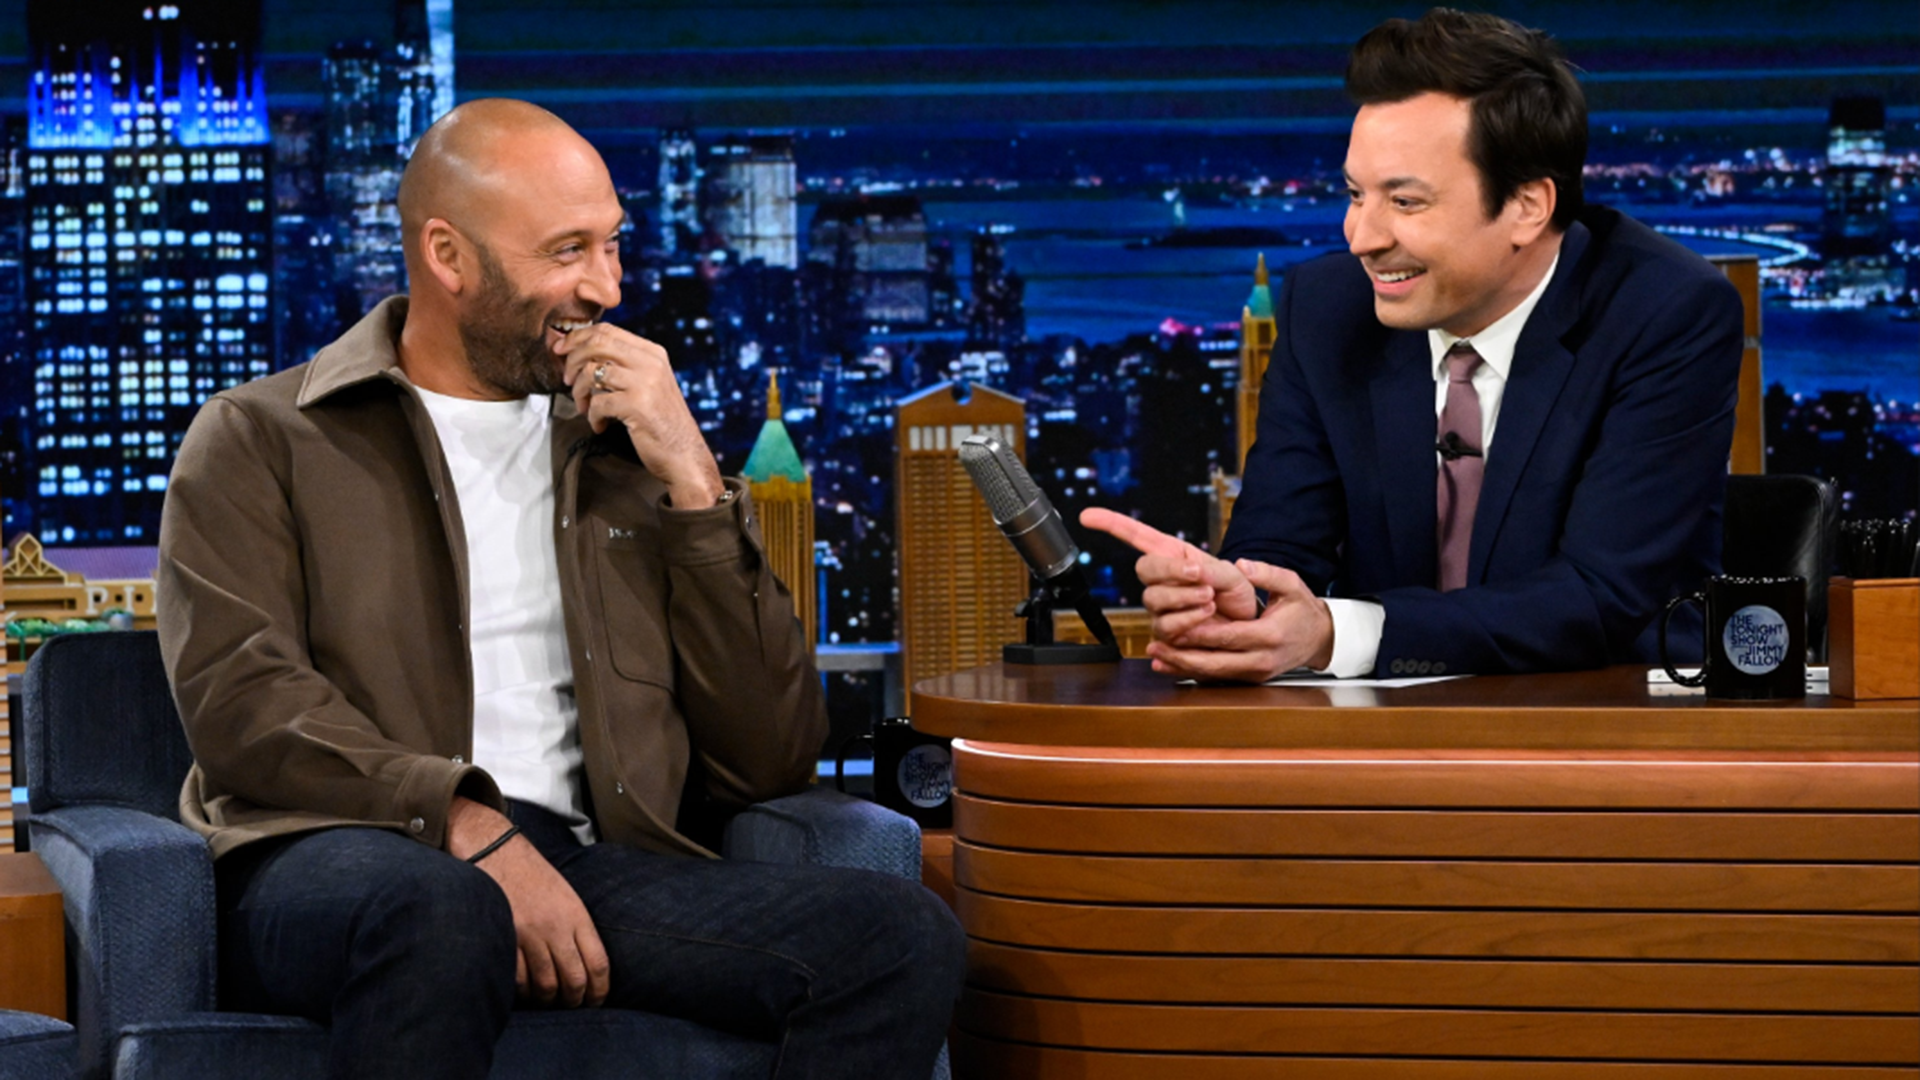 Derek Jeter in a chair on set with Jimmy Fallon, sitting behind a desk